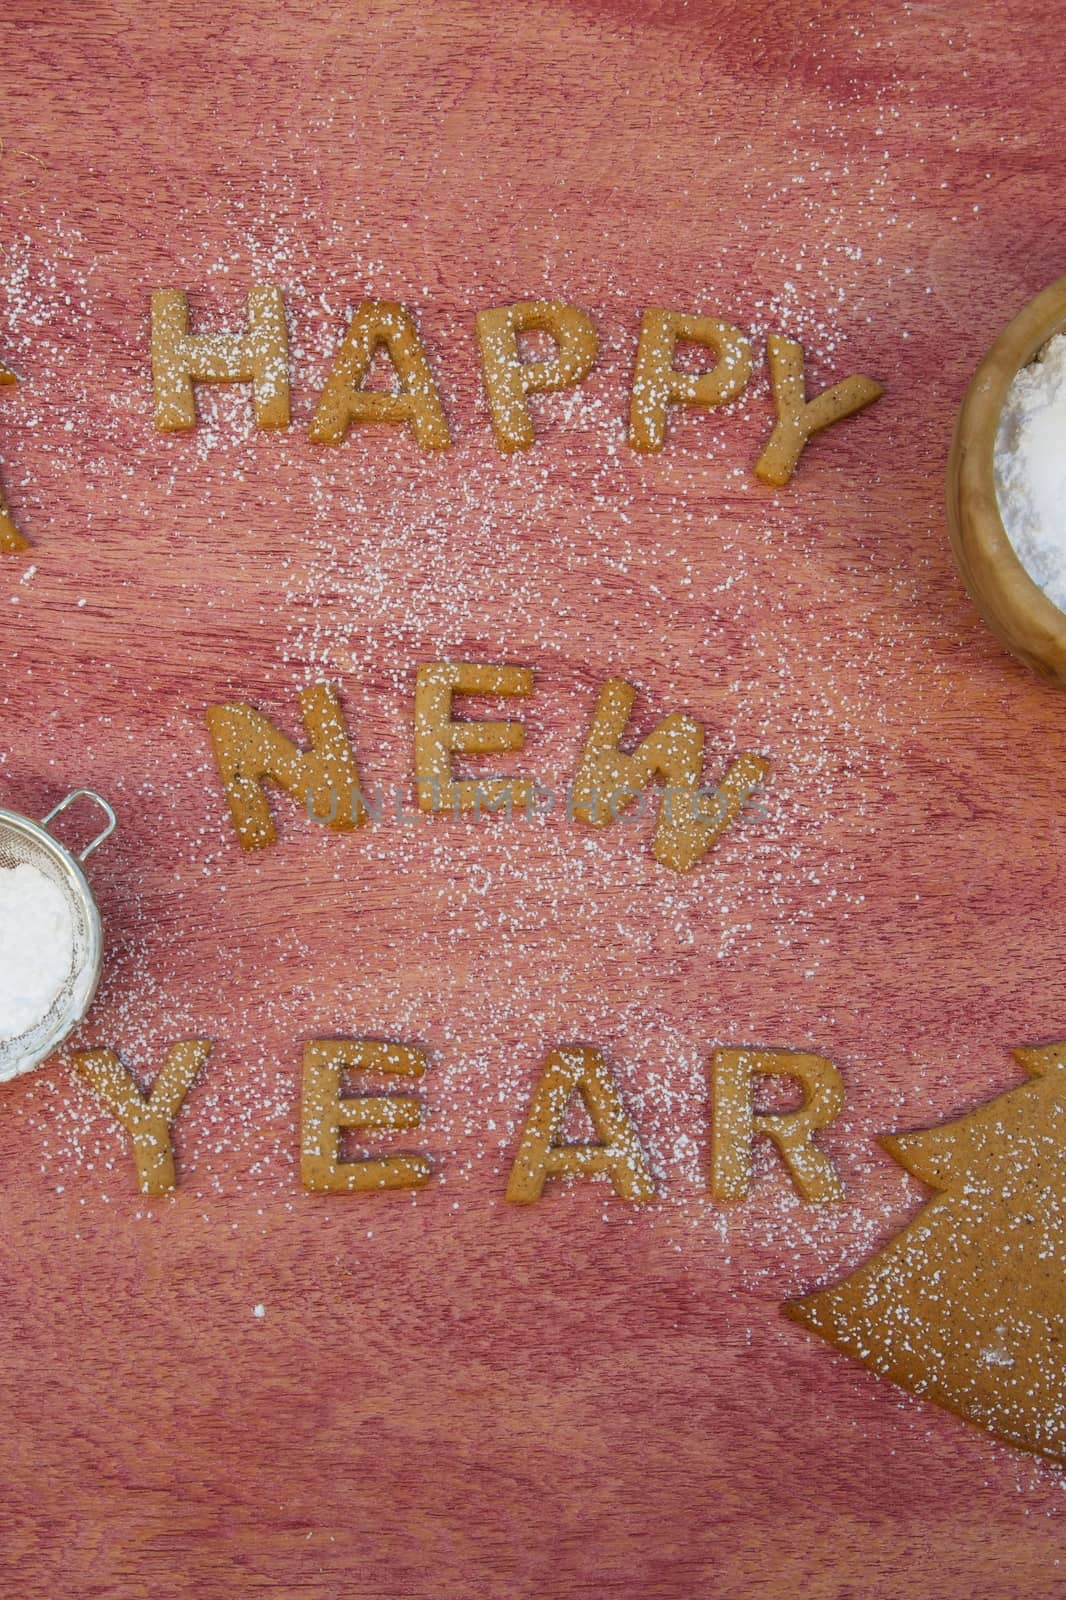 New Year's Day background with biscuit inscription: "Happy New Year". Tea strainer and olive wood dish with sugar powder on a red wooden surface